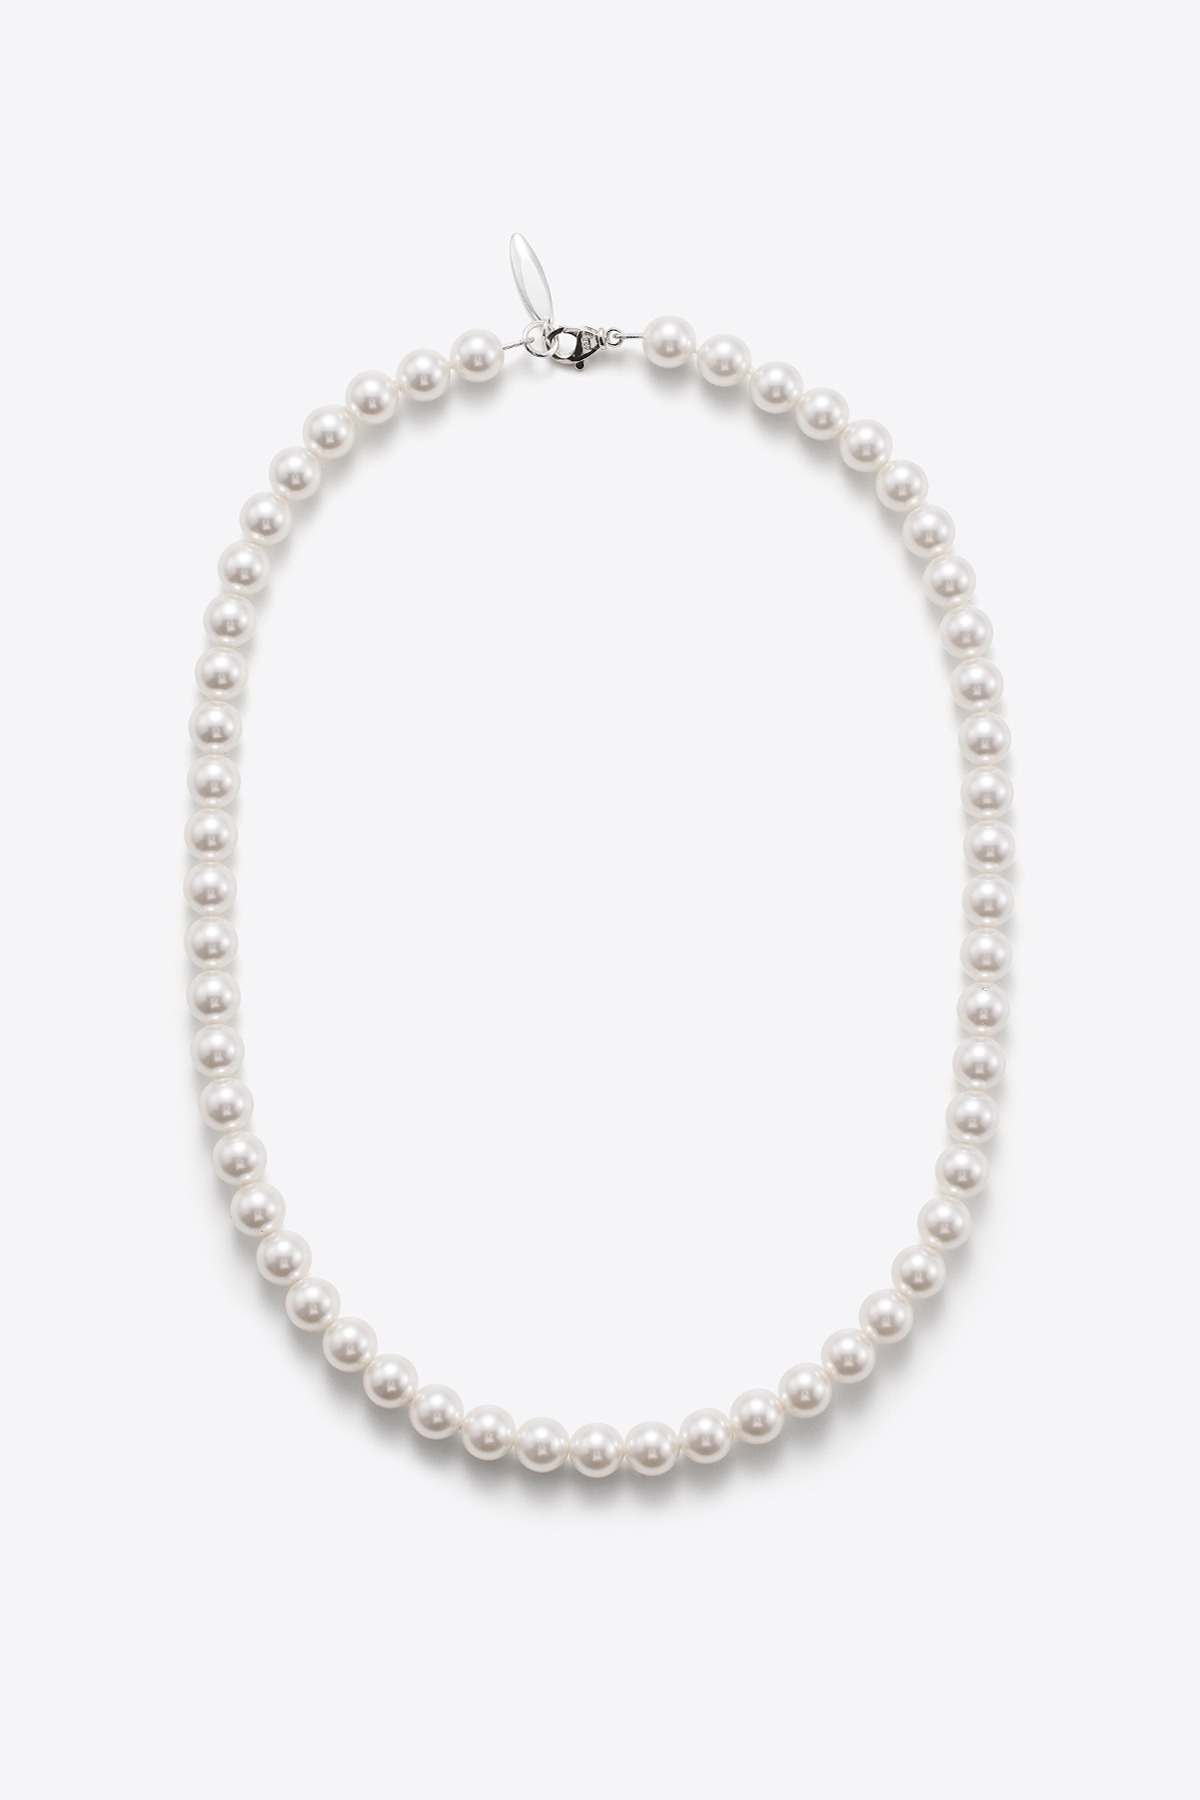 The Pearl Necklace For Mens 8mm